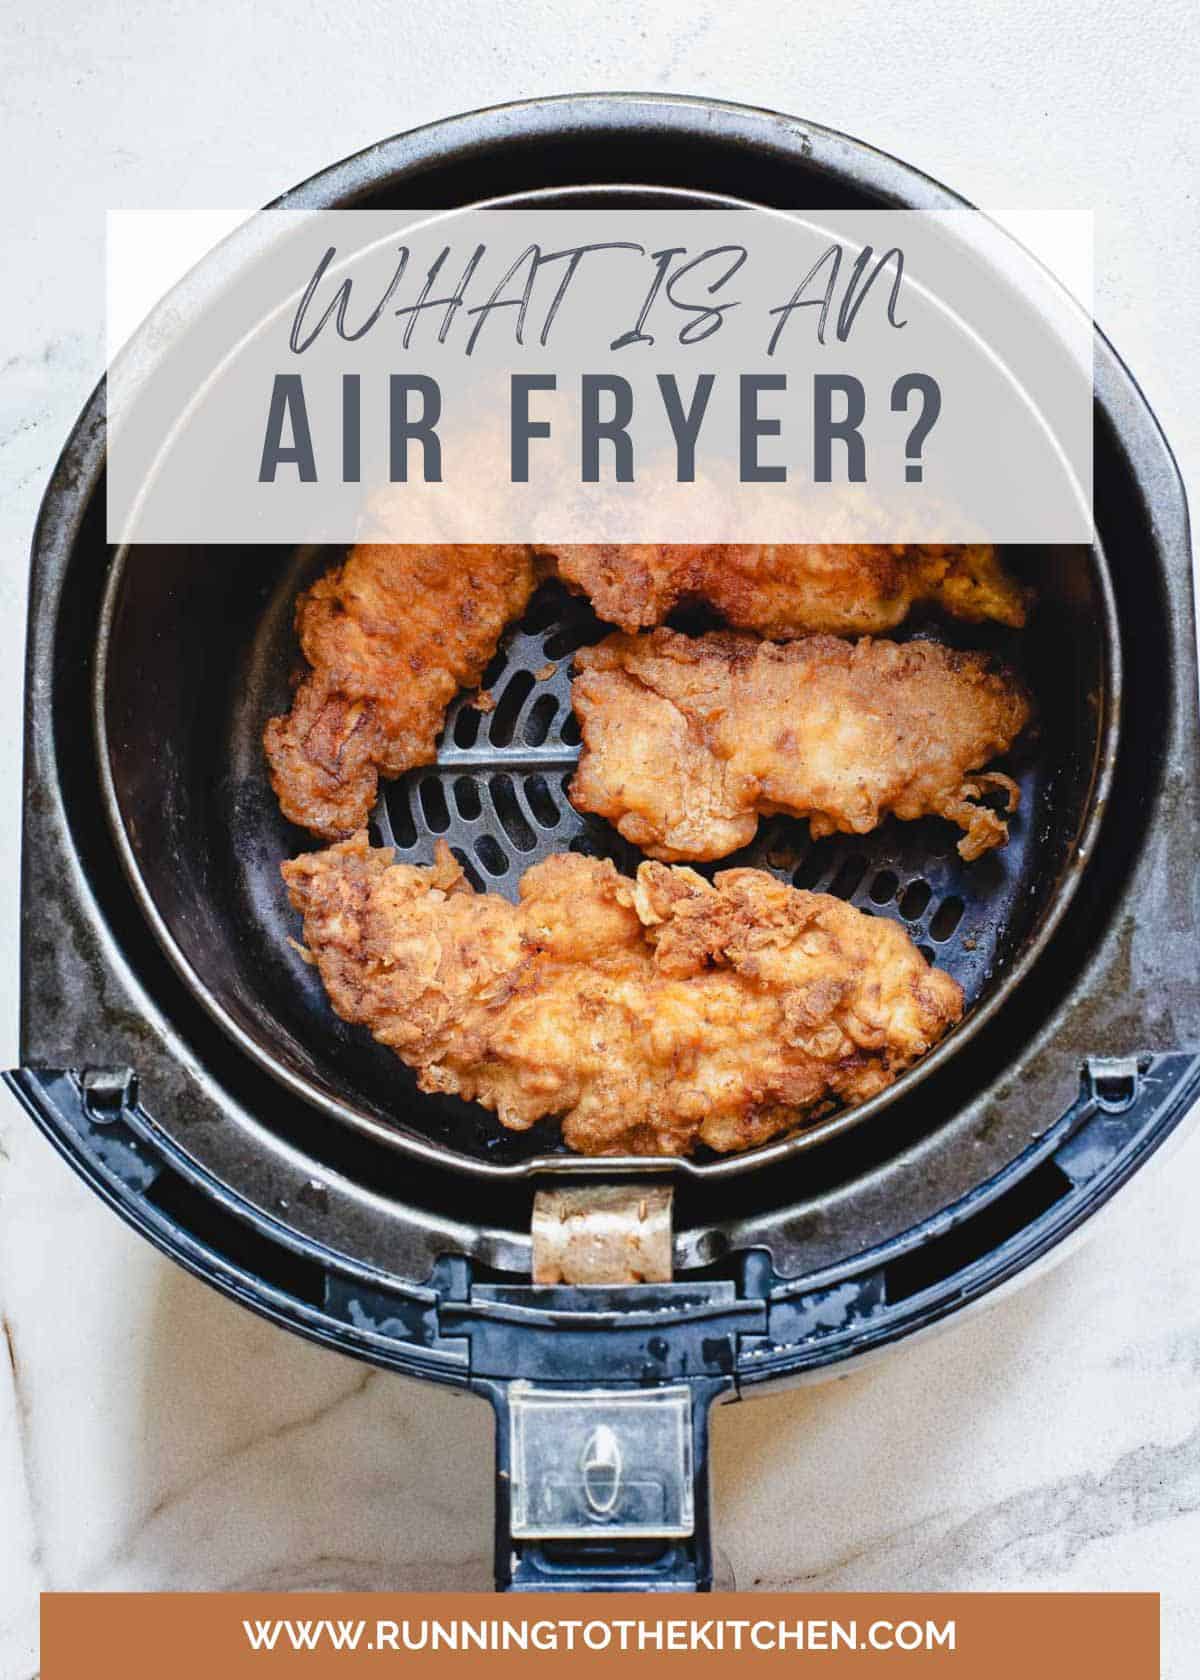 Air fryer with buffalo chicken tenders in the basket.